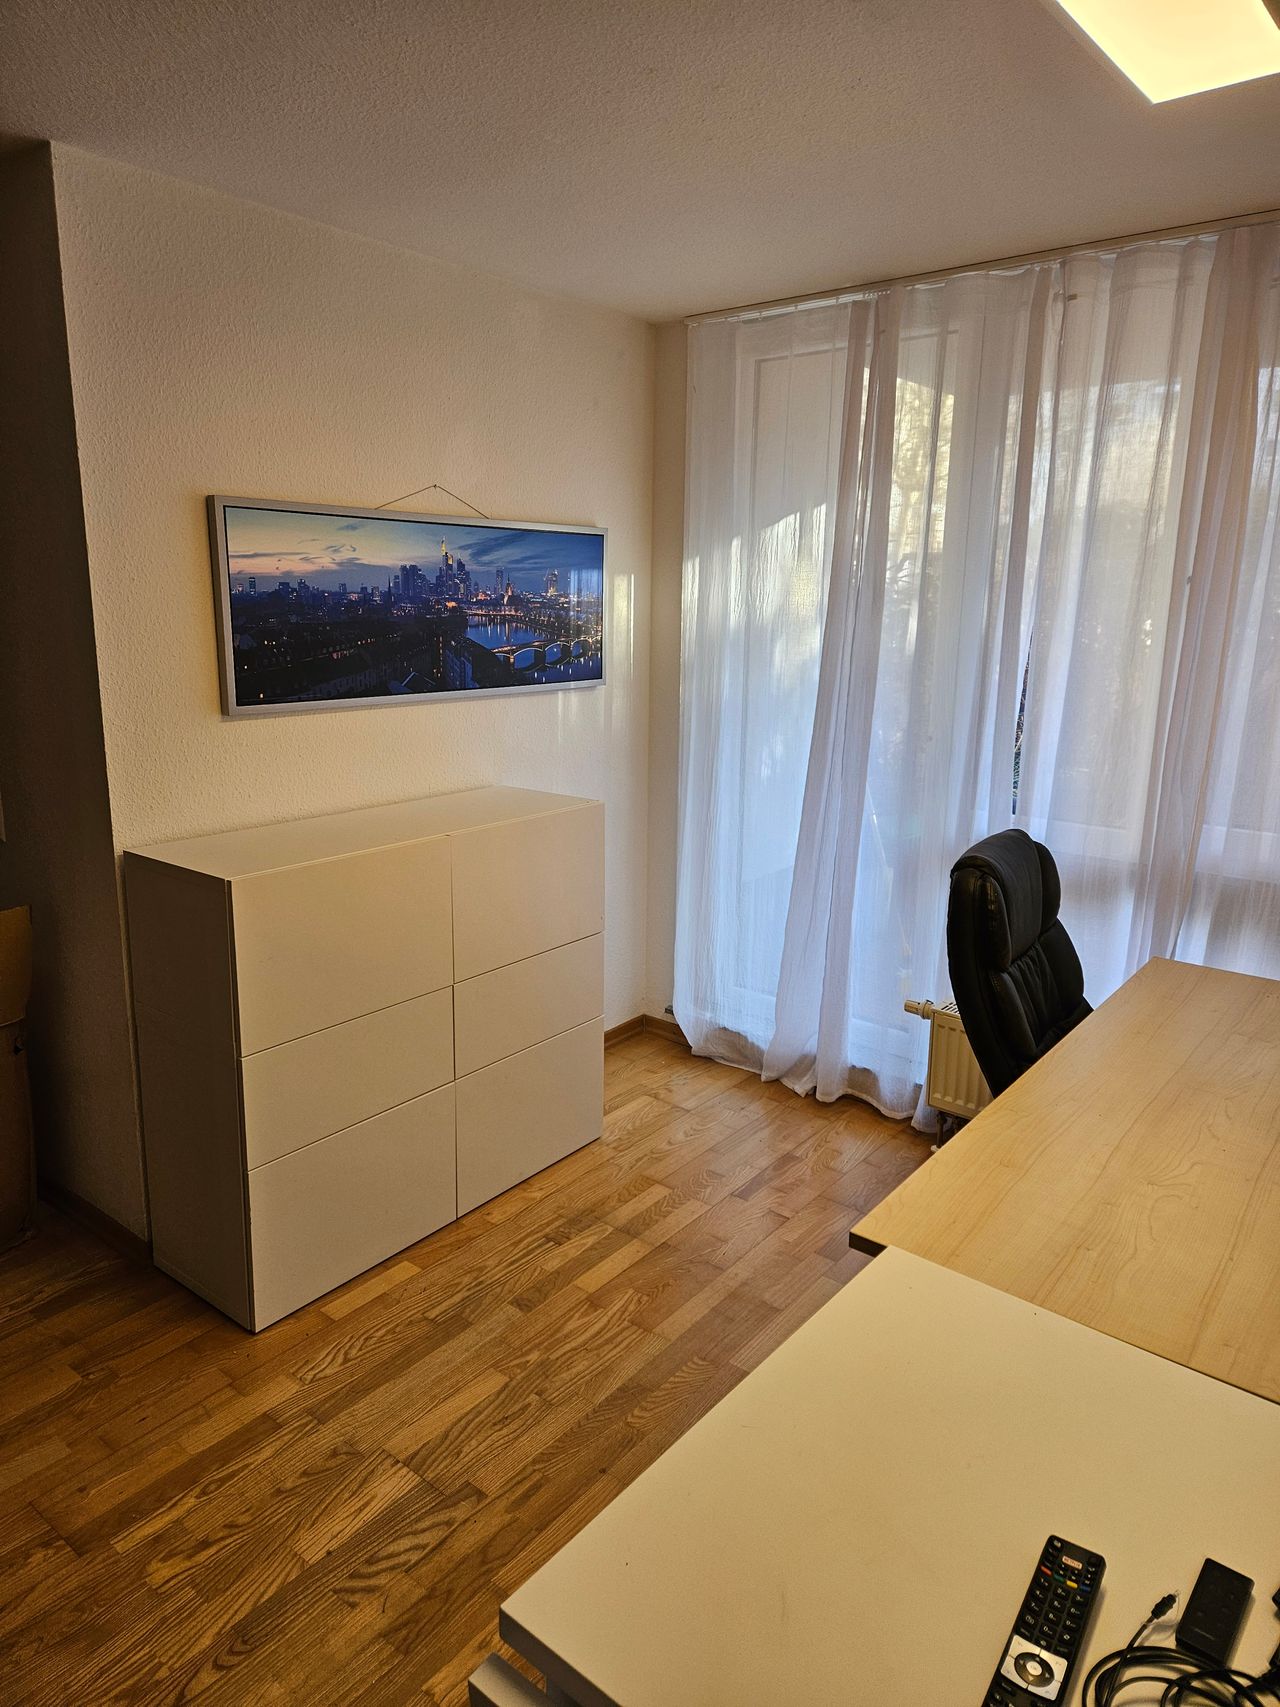 Cozy 3-room apartment close to Skyline Plaza - in the heart of Frankfurt